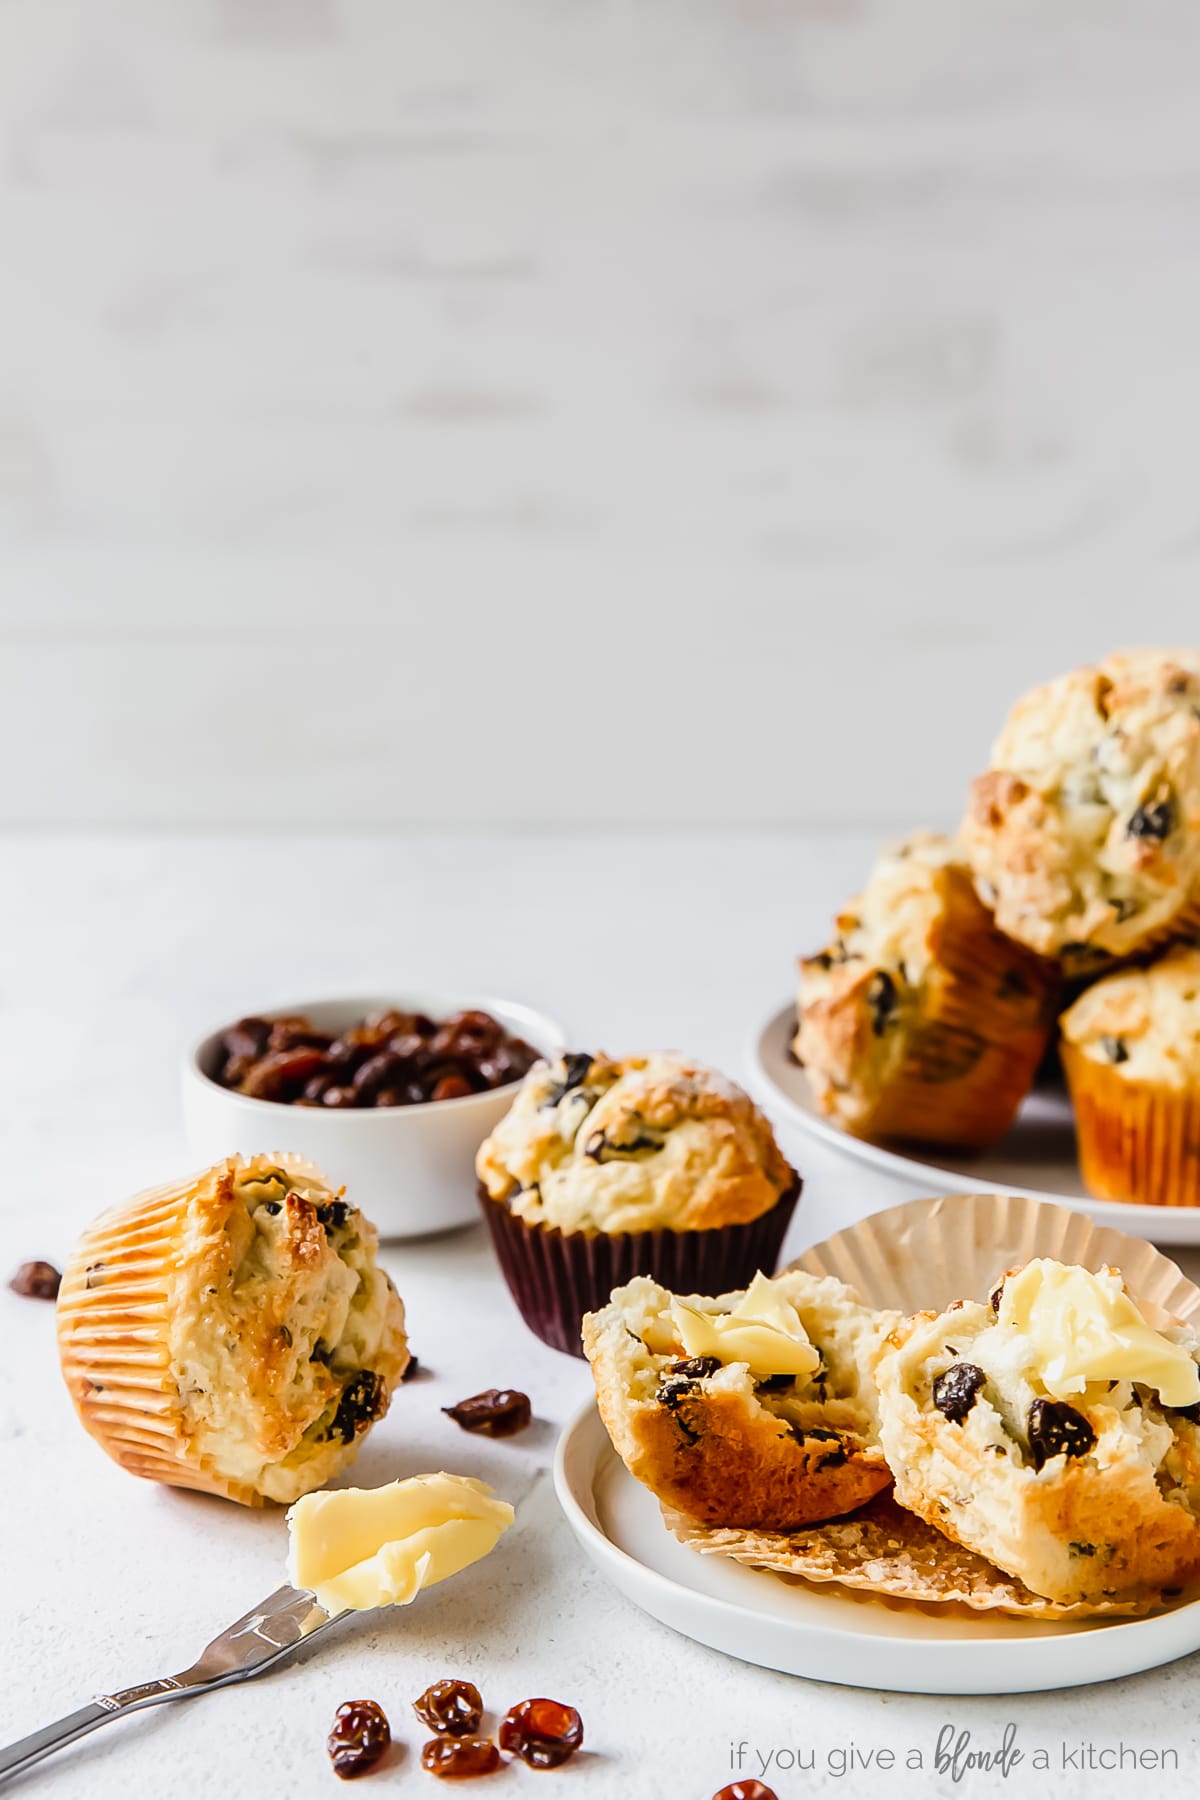 irish soda bread muffin cut in half with butter on knife next to more muffins and raisins.